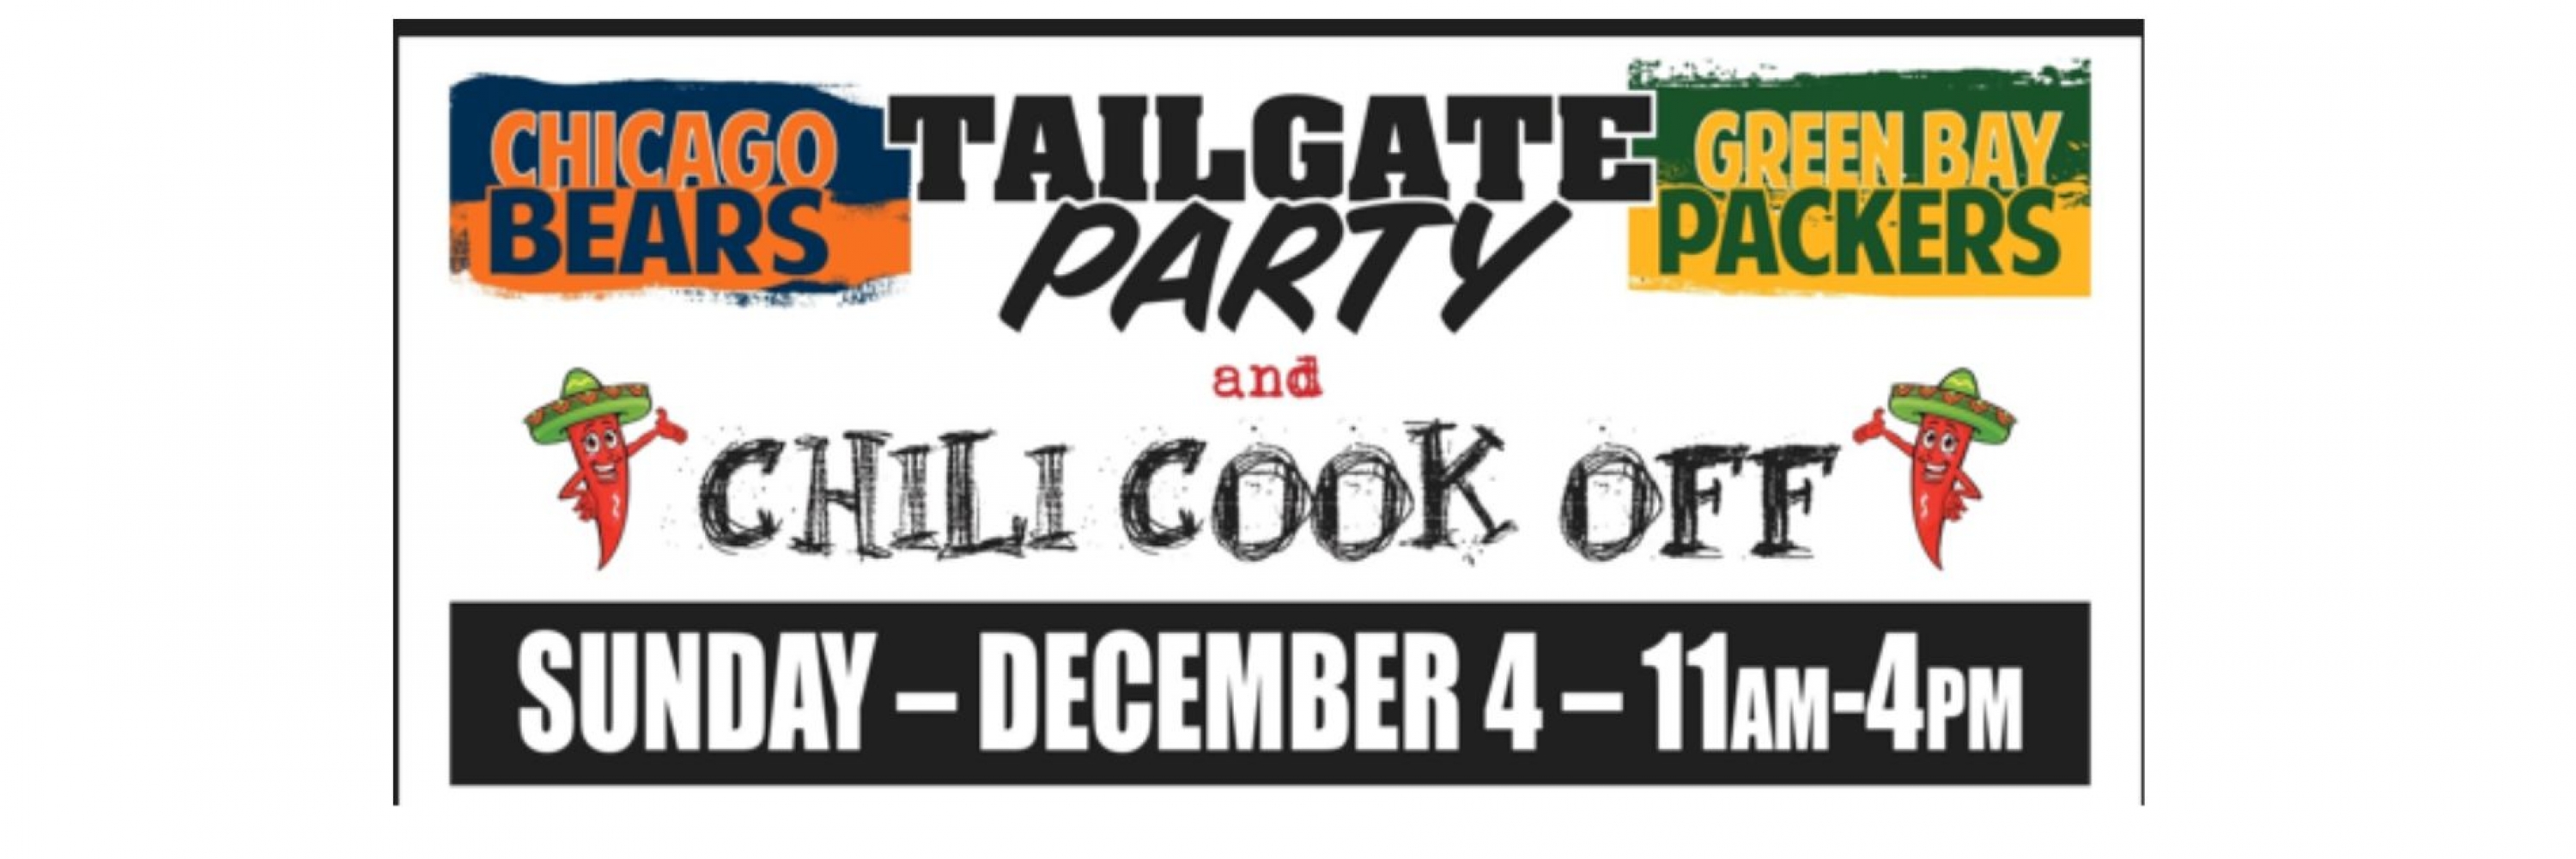 tailgate-party-banner-2